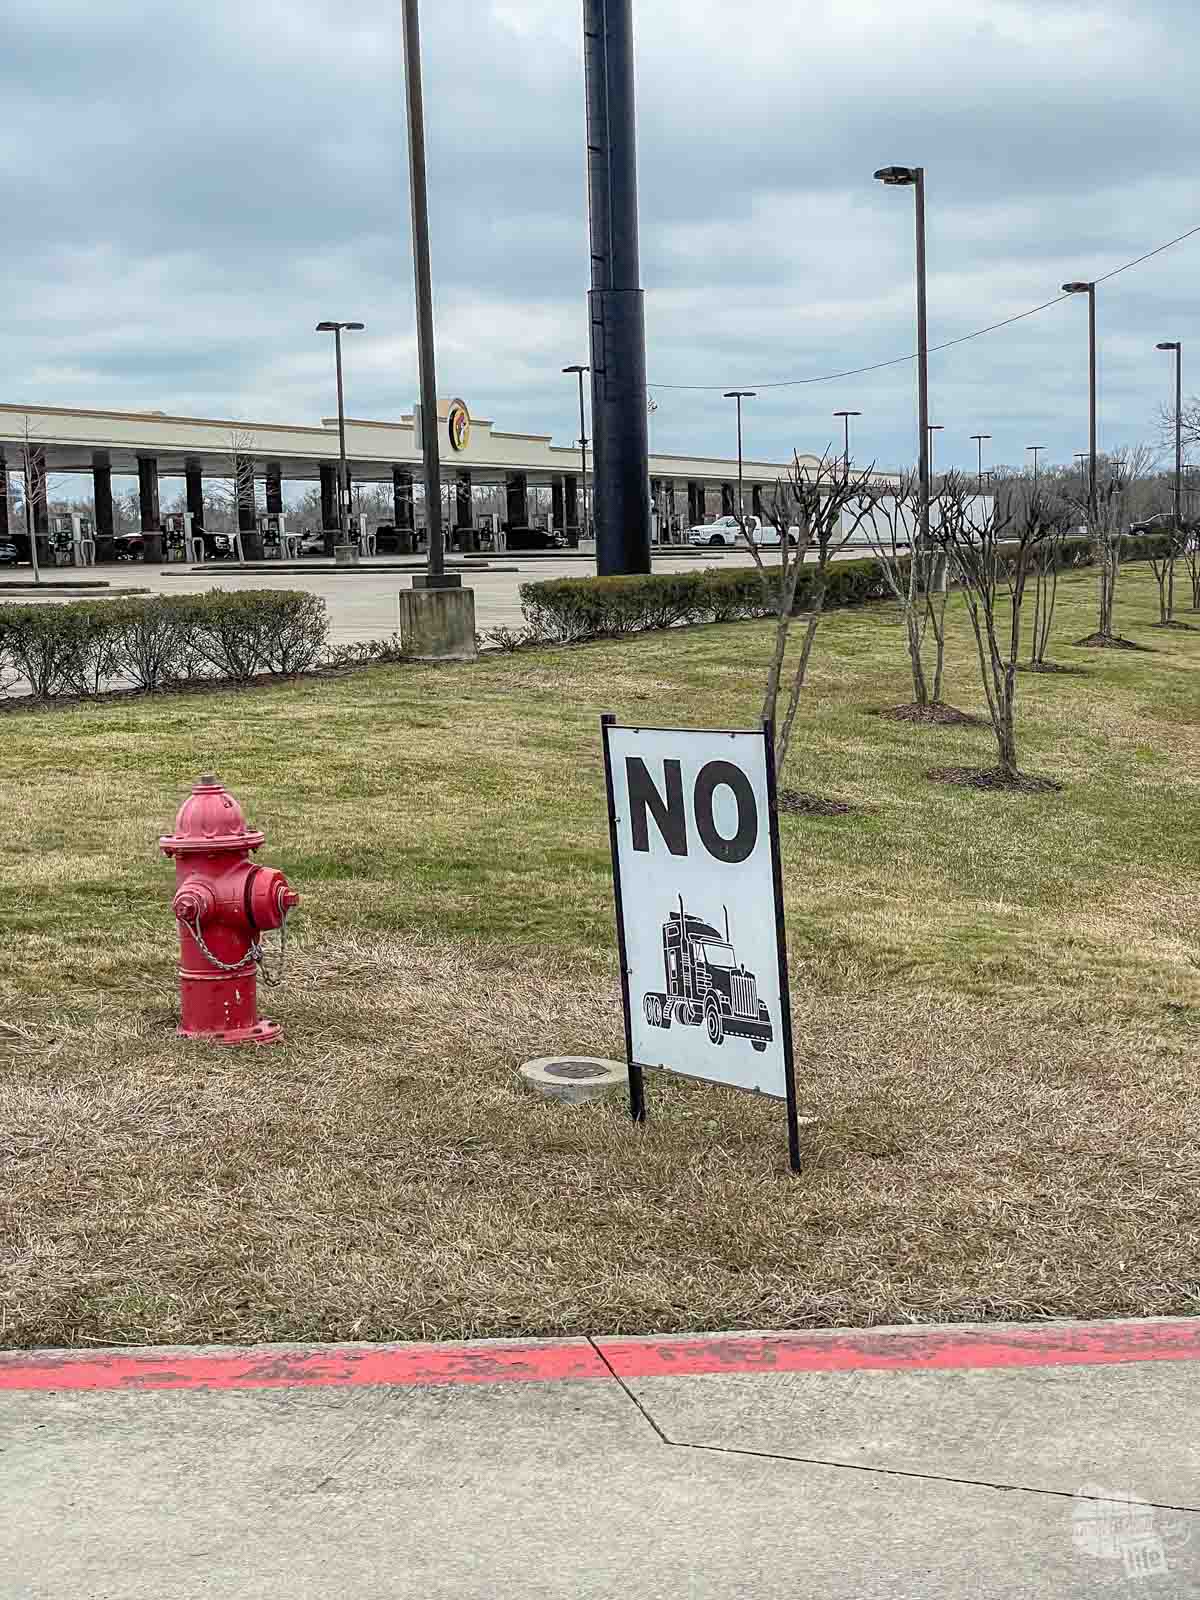 You won't find any semi trucks at Buc-ee's.